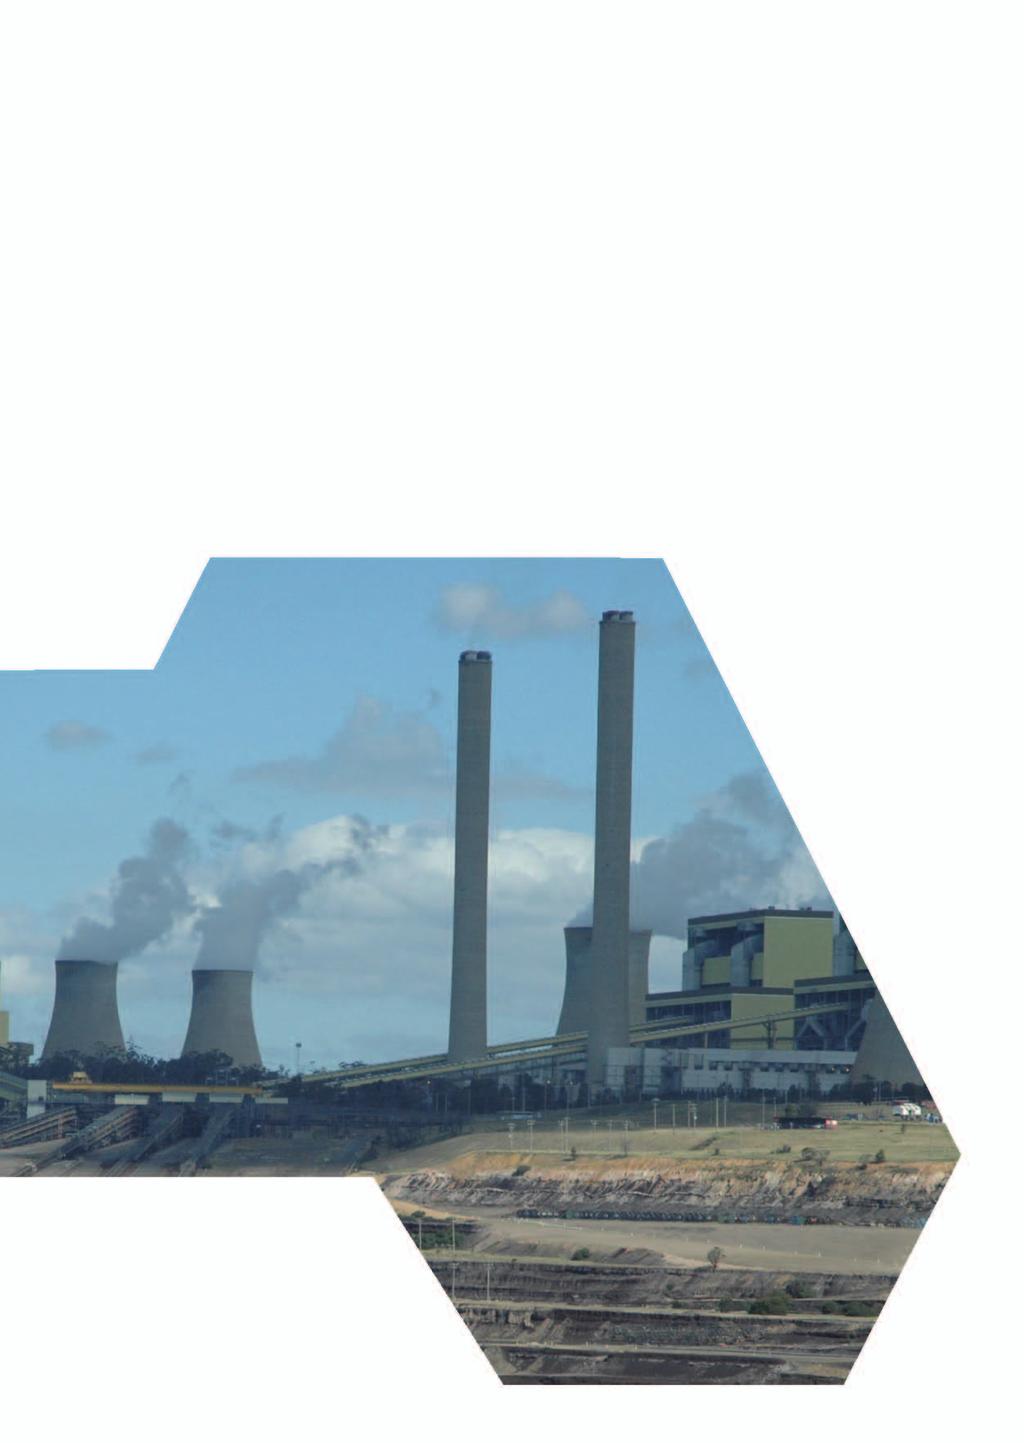 Victorian power stations and biochar opportunities This case study explores how a